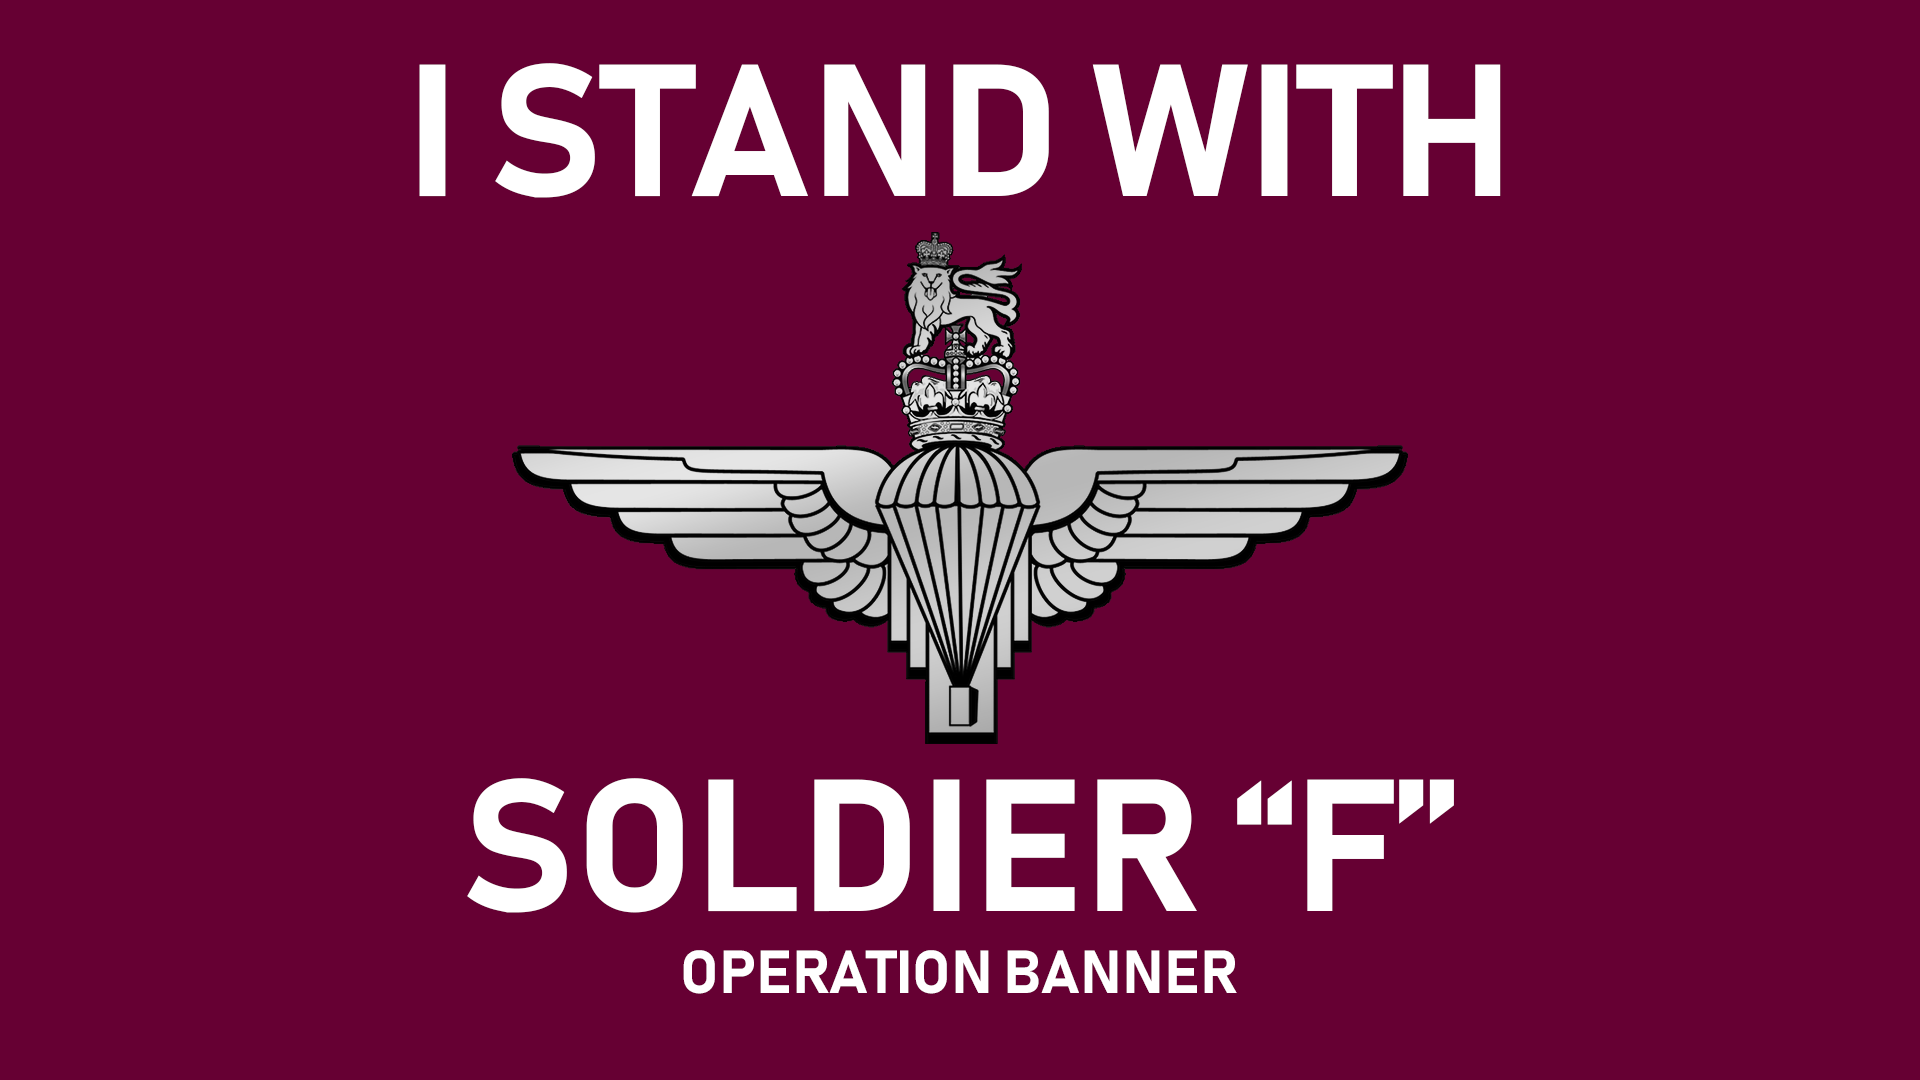 I stand with Soldier F